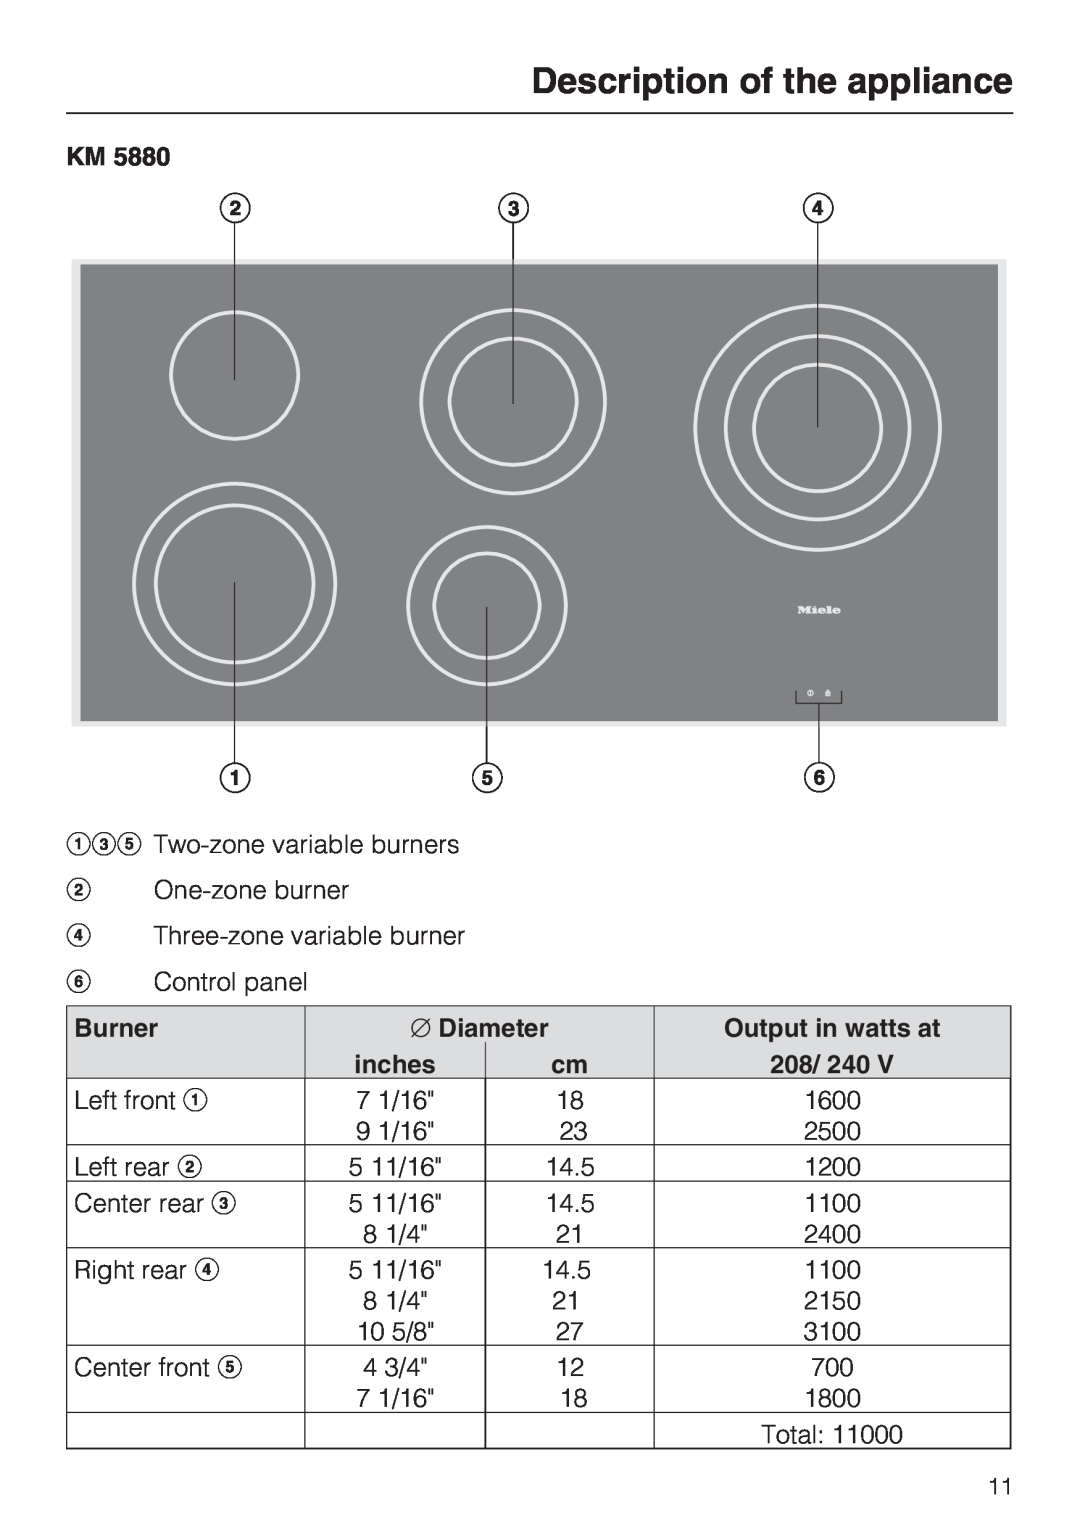 Miele KM 5840, KM 5860, KM 5880 208/ 240, Description of the appliance, Burner, Diameter, Output in watts at, inches 